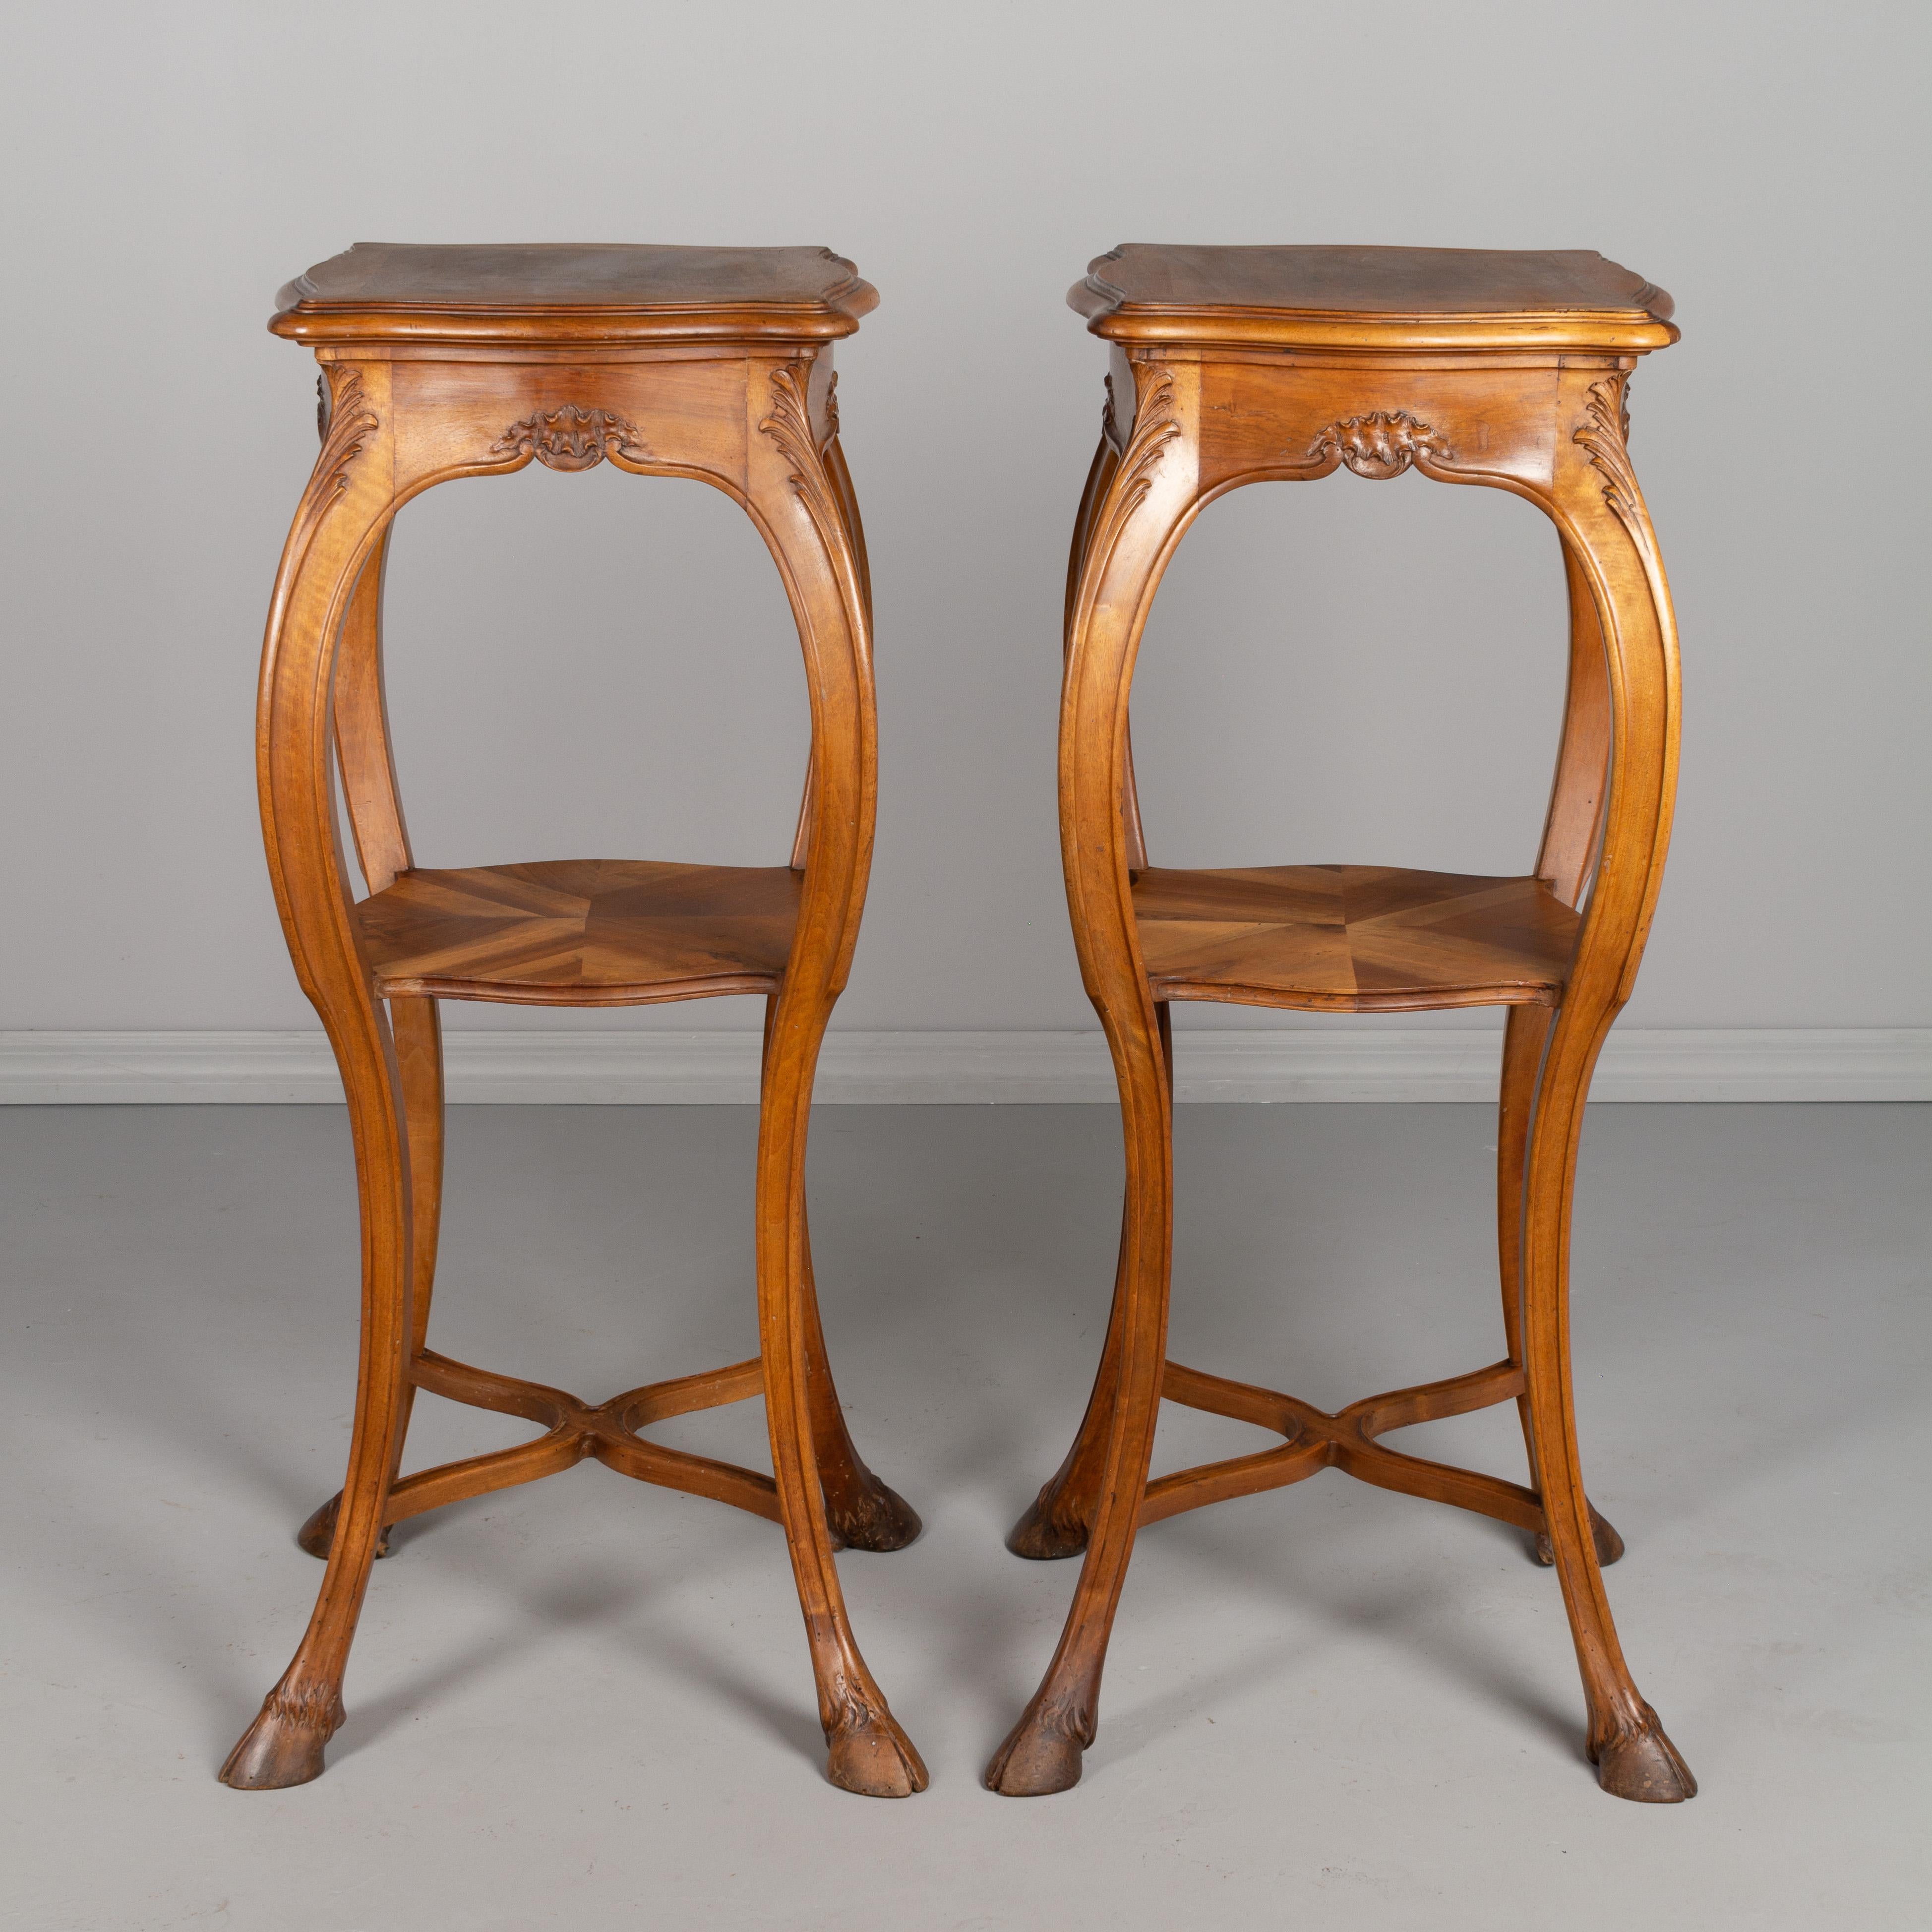 Pair of French Art Nouveau Sellettes or Tall Pedestals In Good Condition For Sale In Winter Park, FL